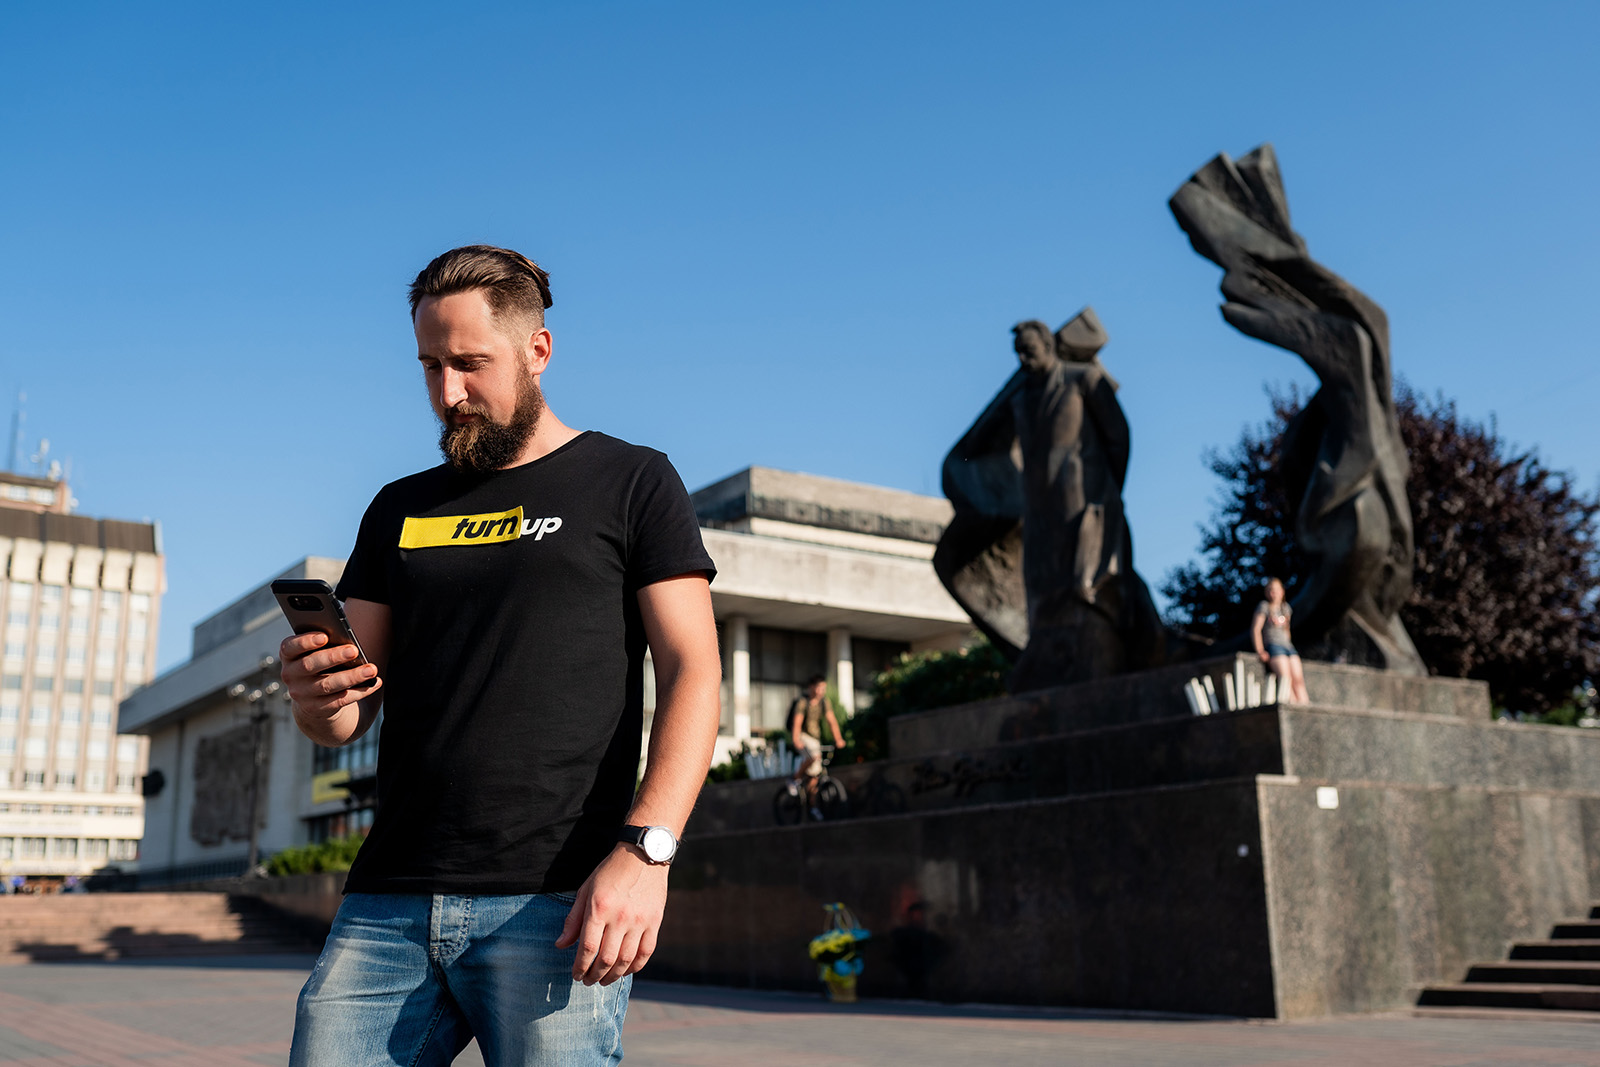 SMART tourism: all information about Ivano-Frankivsk in one mobile app